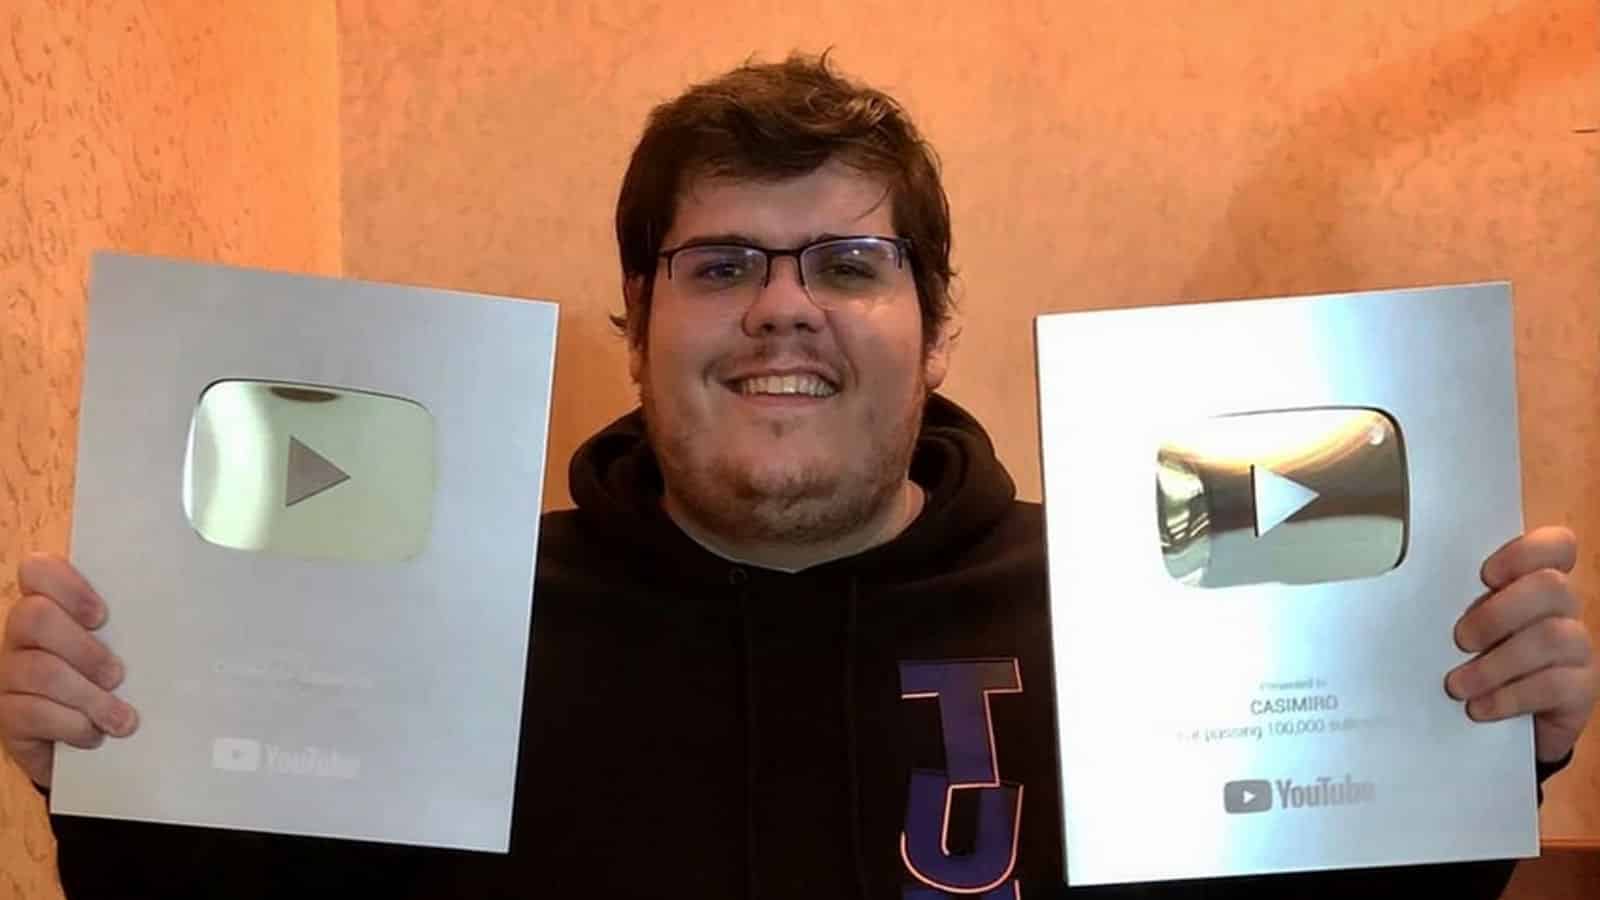 Twitch streamer Casimiro with two YouTube 100k subscriber playbutton plaques